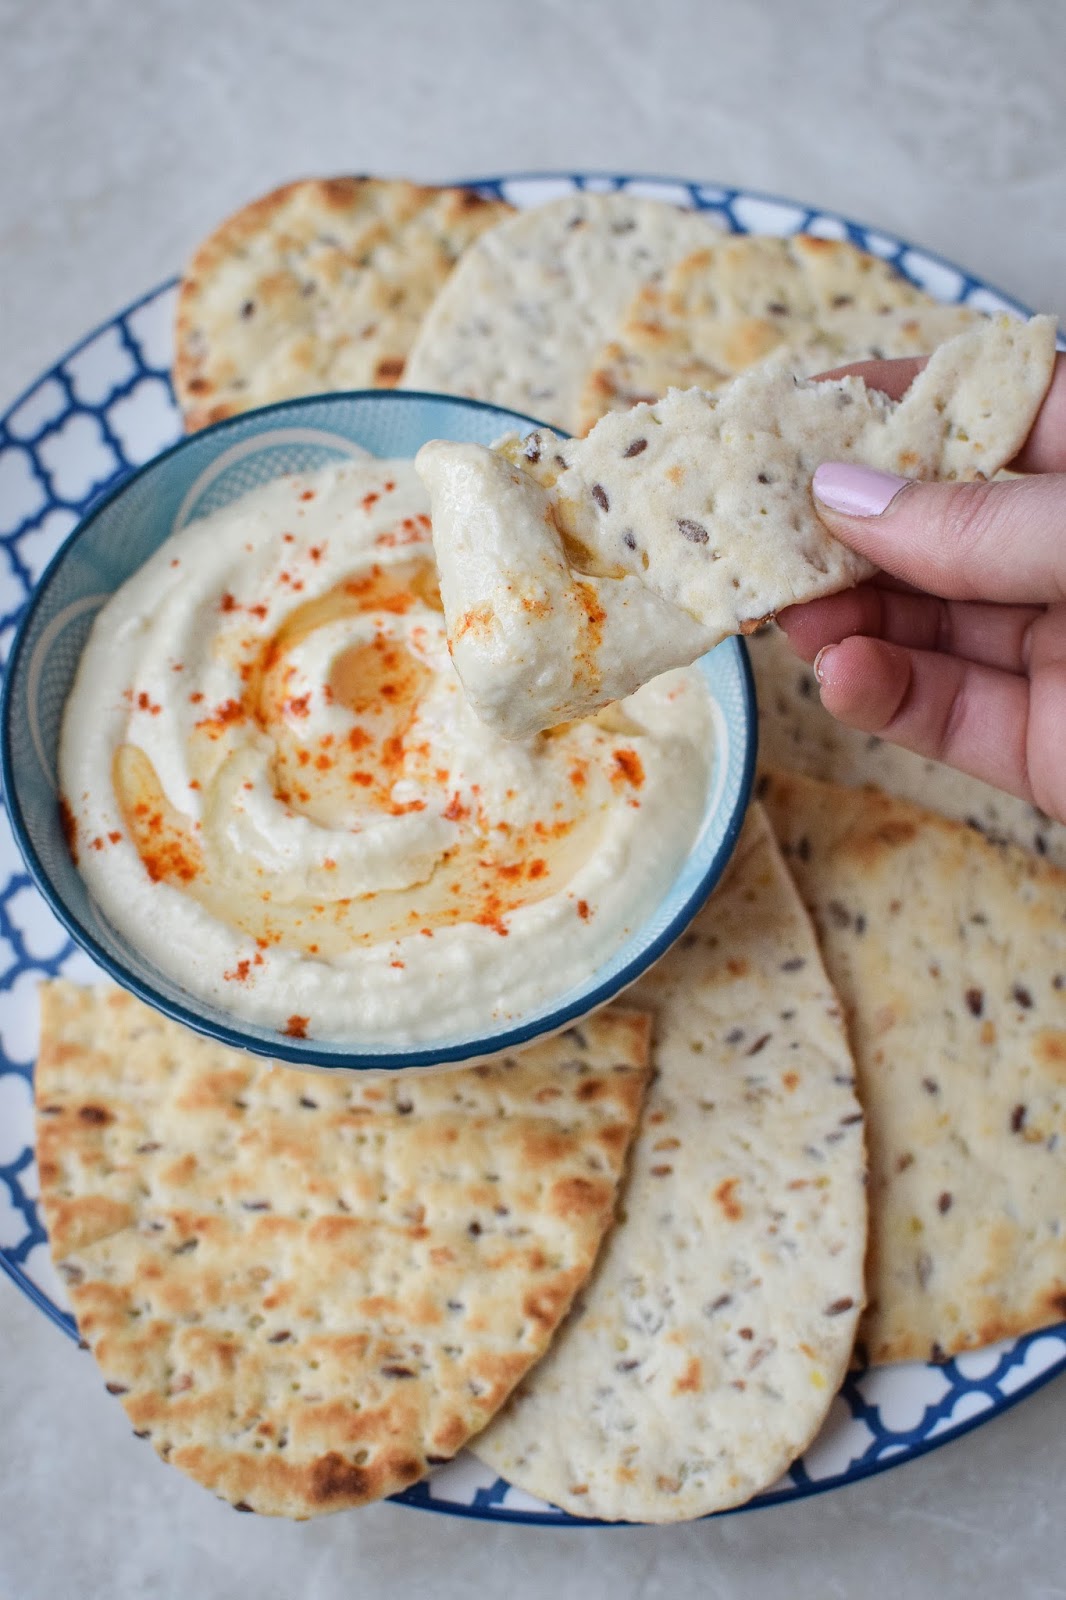 Once you've mastered this classic hummus you can start experimenting with flavours.